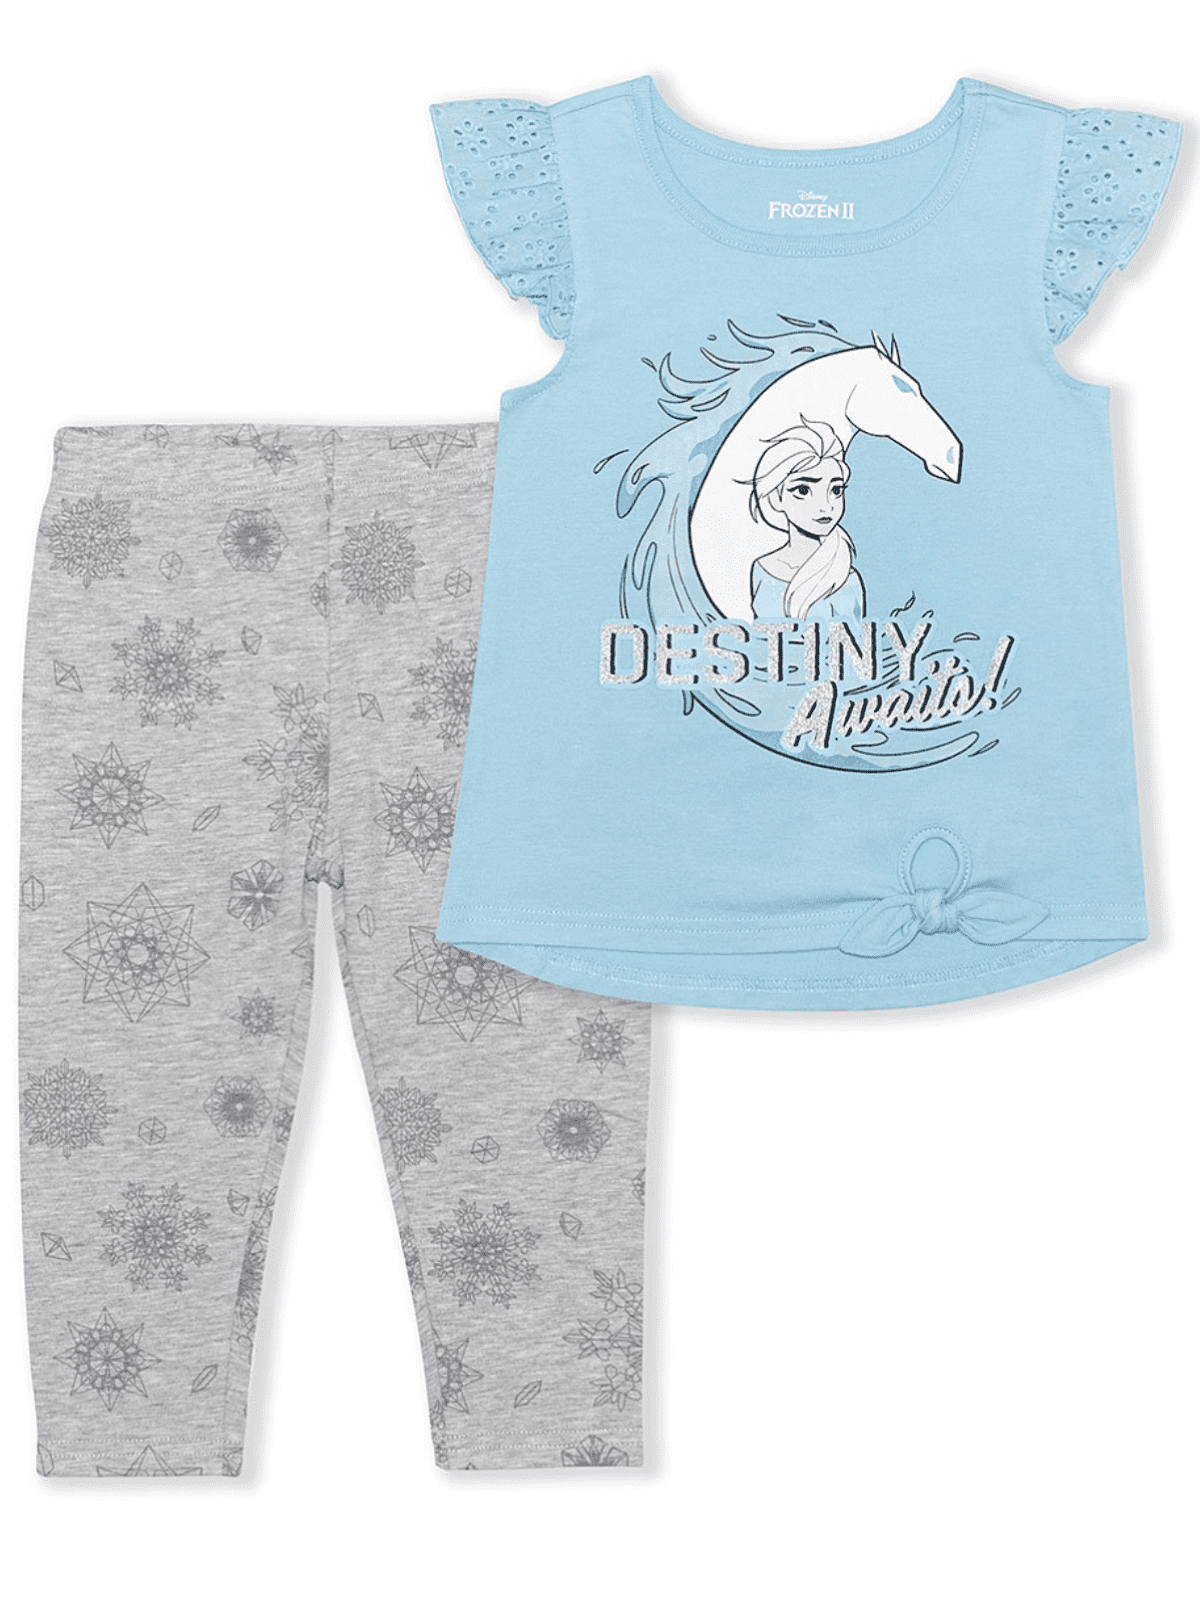 Top Rated Products in Disney Frozen Clothing